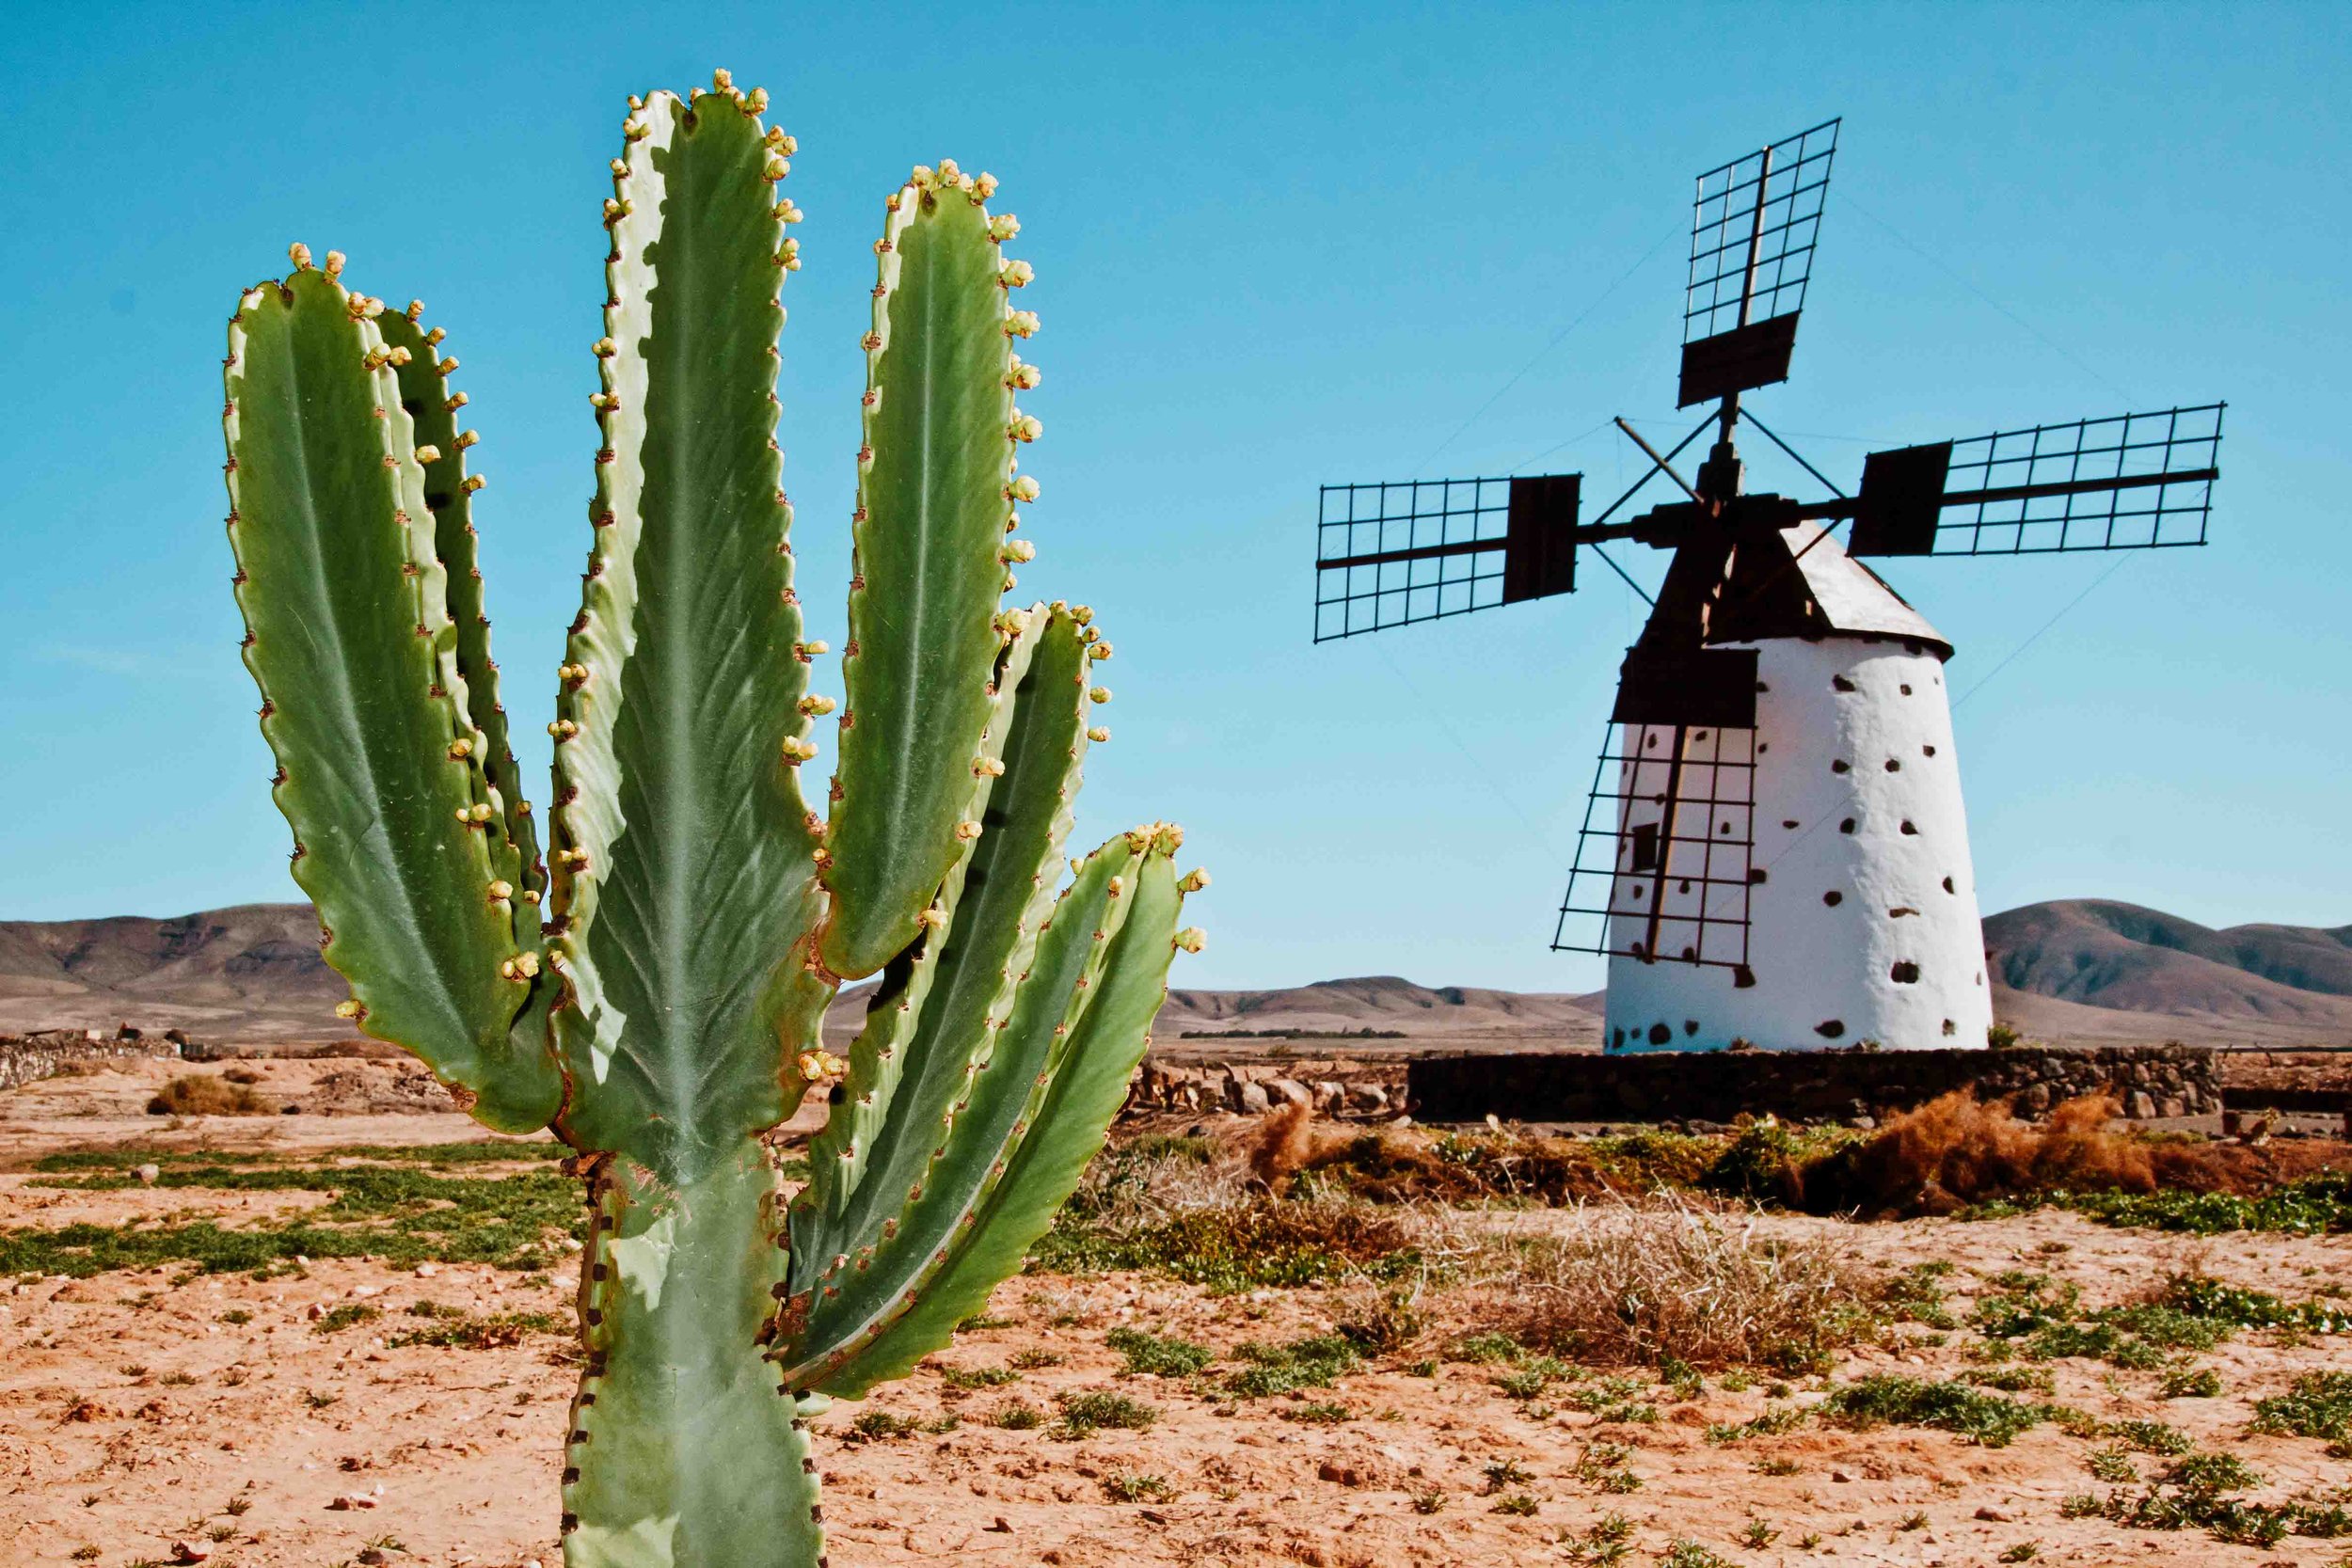 Cactus and a traditional windmill in Fuerteventura the hottest of the canary islands